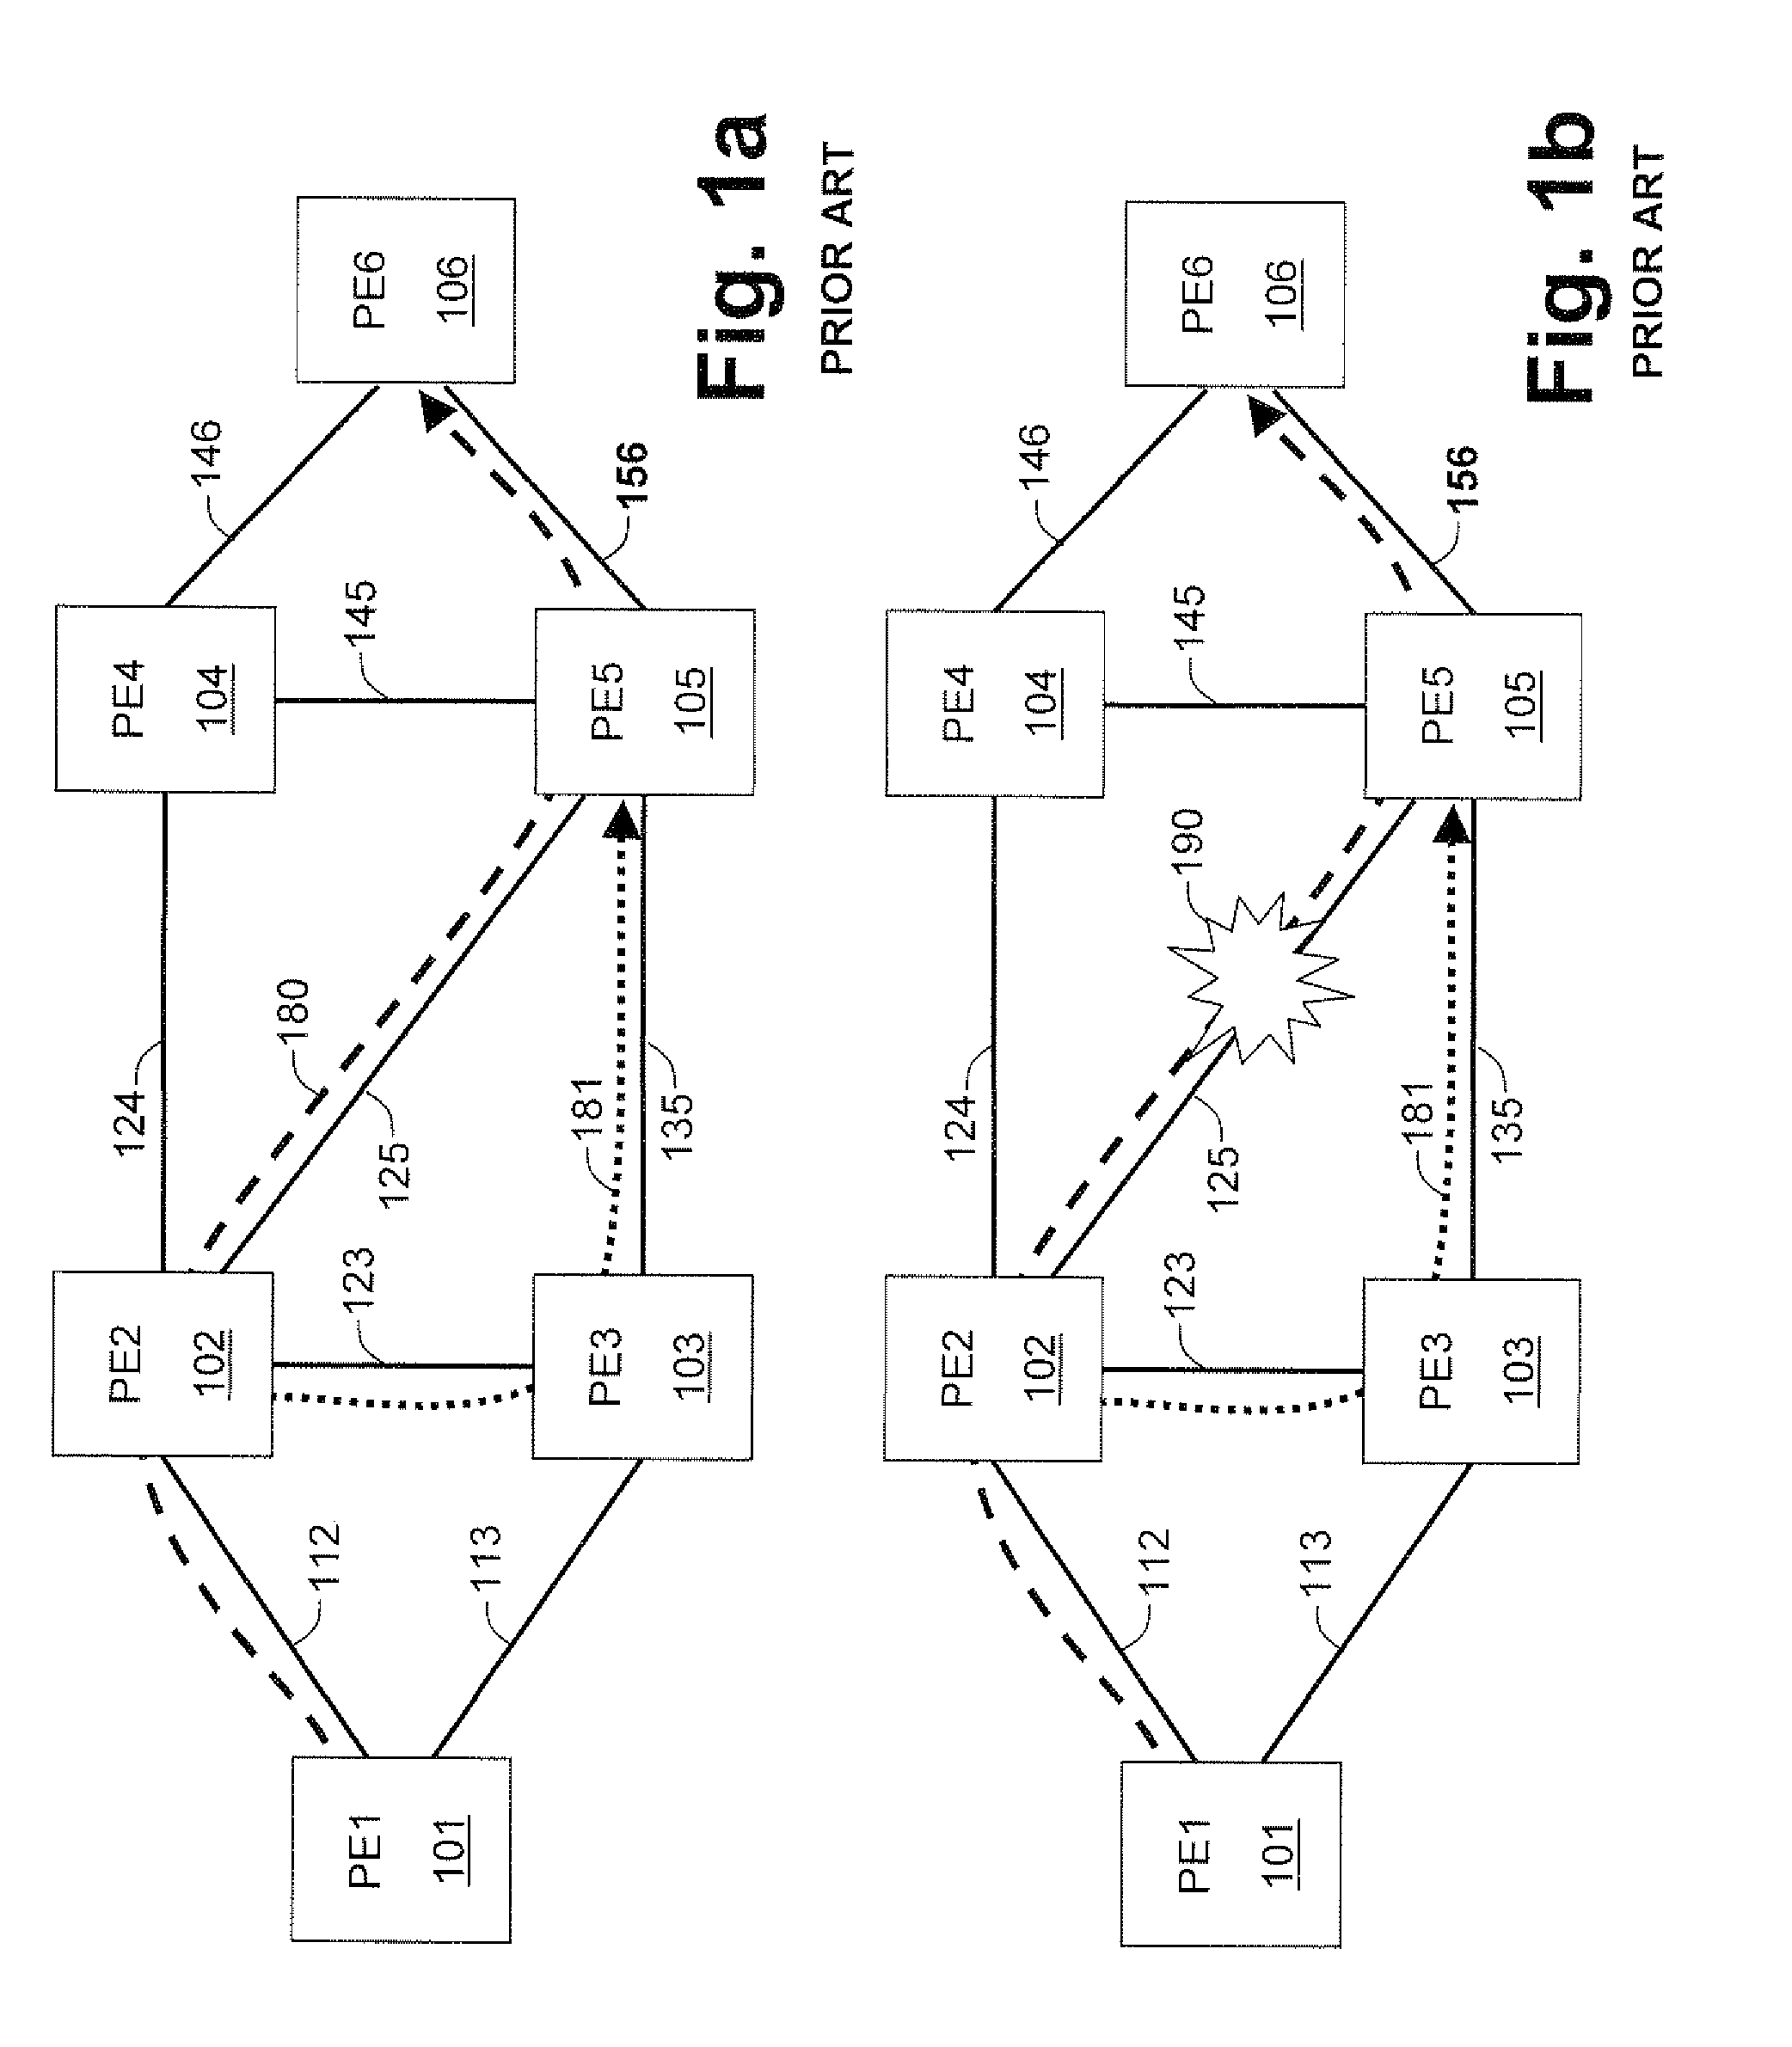 System and method providing standby bypass for double failure protection in MPLS network